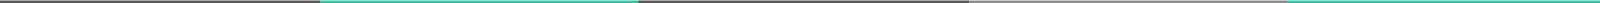 Thin graphic divider bar with greys and light green